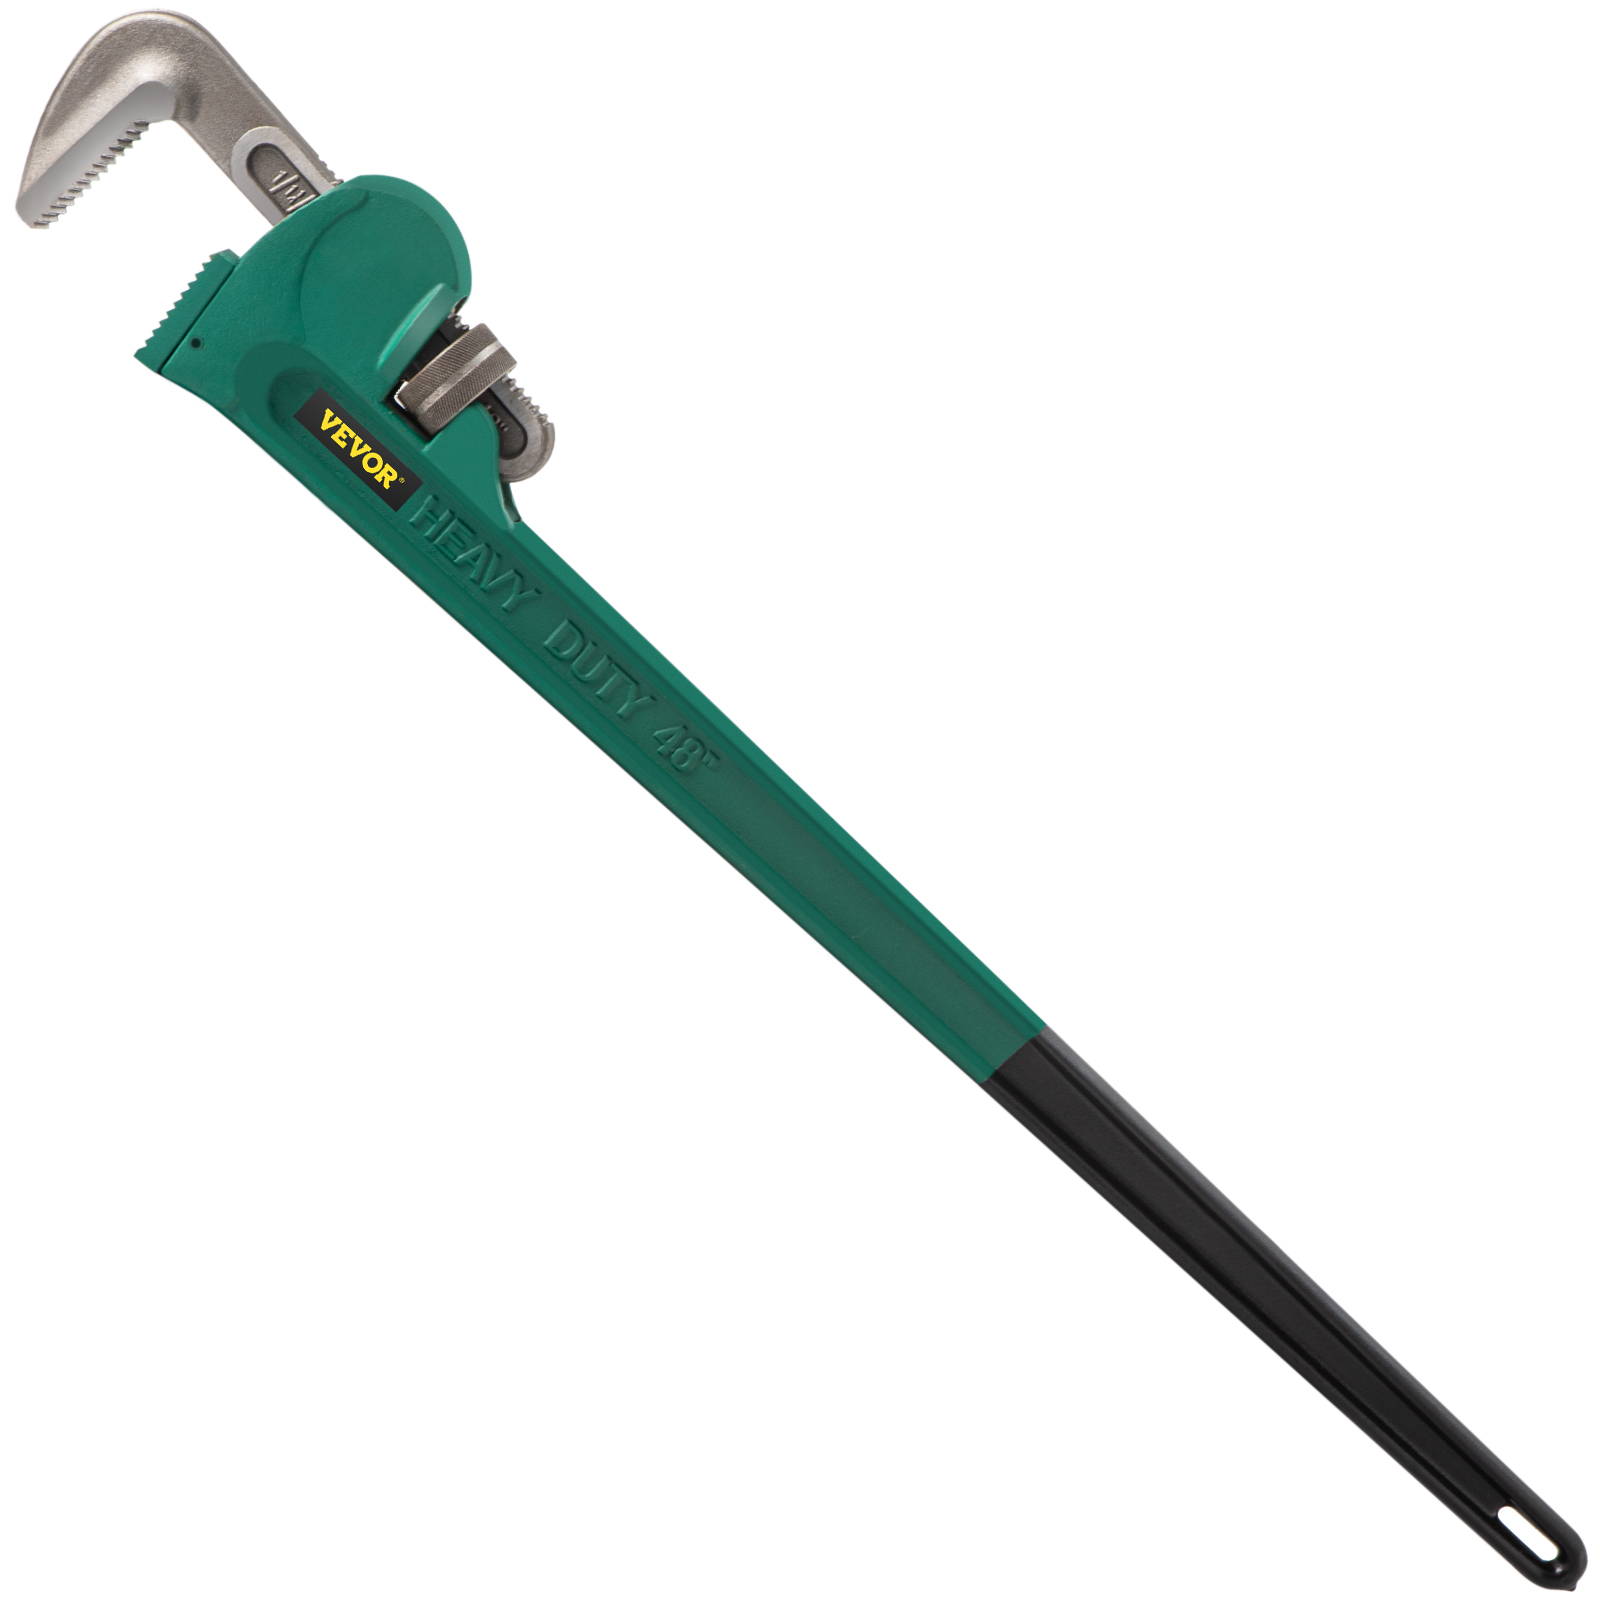 Pipe Wrench 48" Aluminum Straight Pipe Wrench Heat Treated Jaw 4.3" Capacity от Vevor Many GEOs